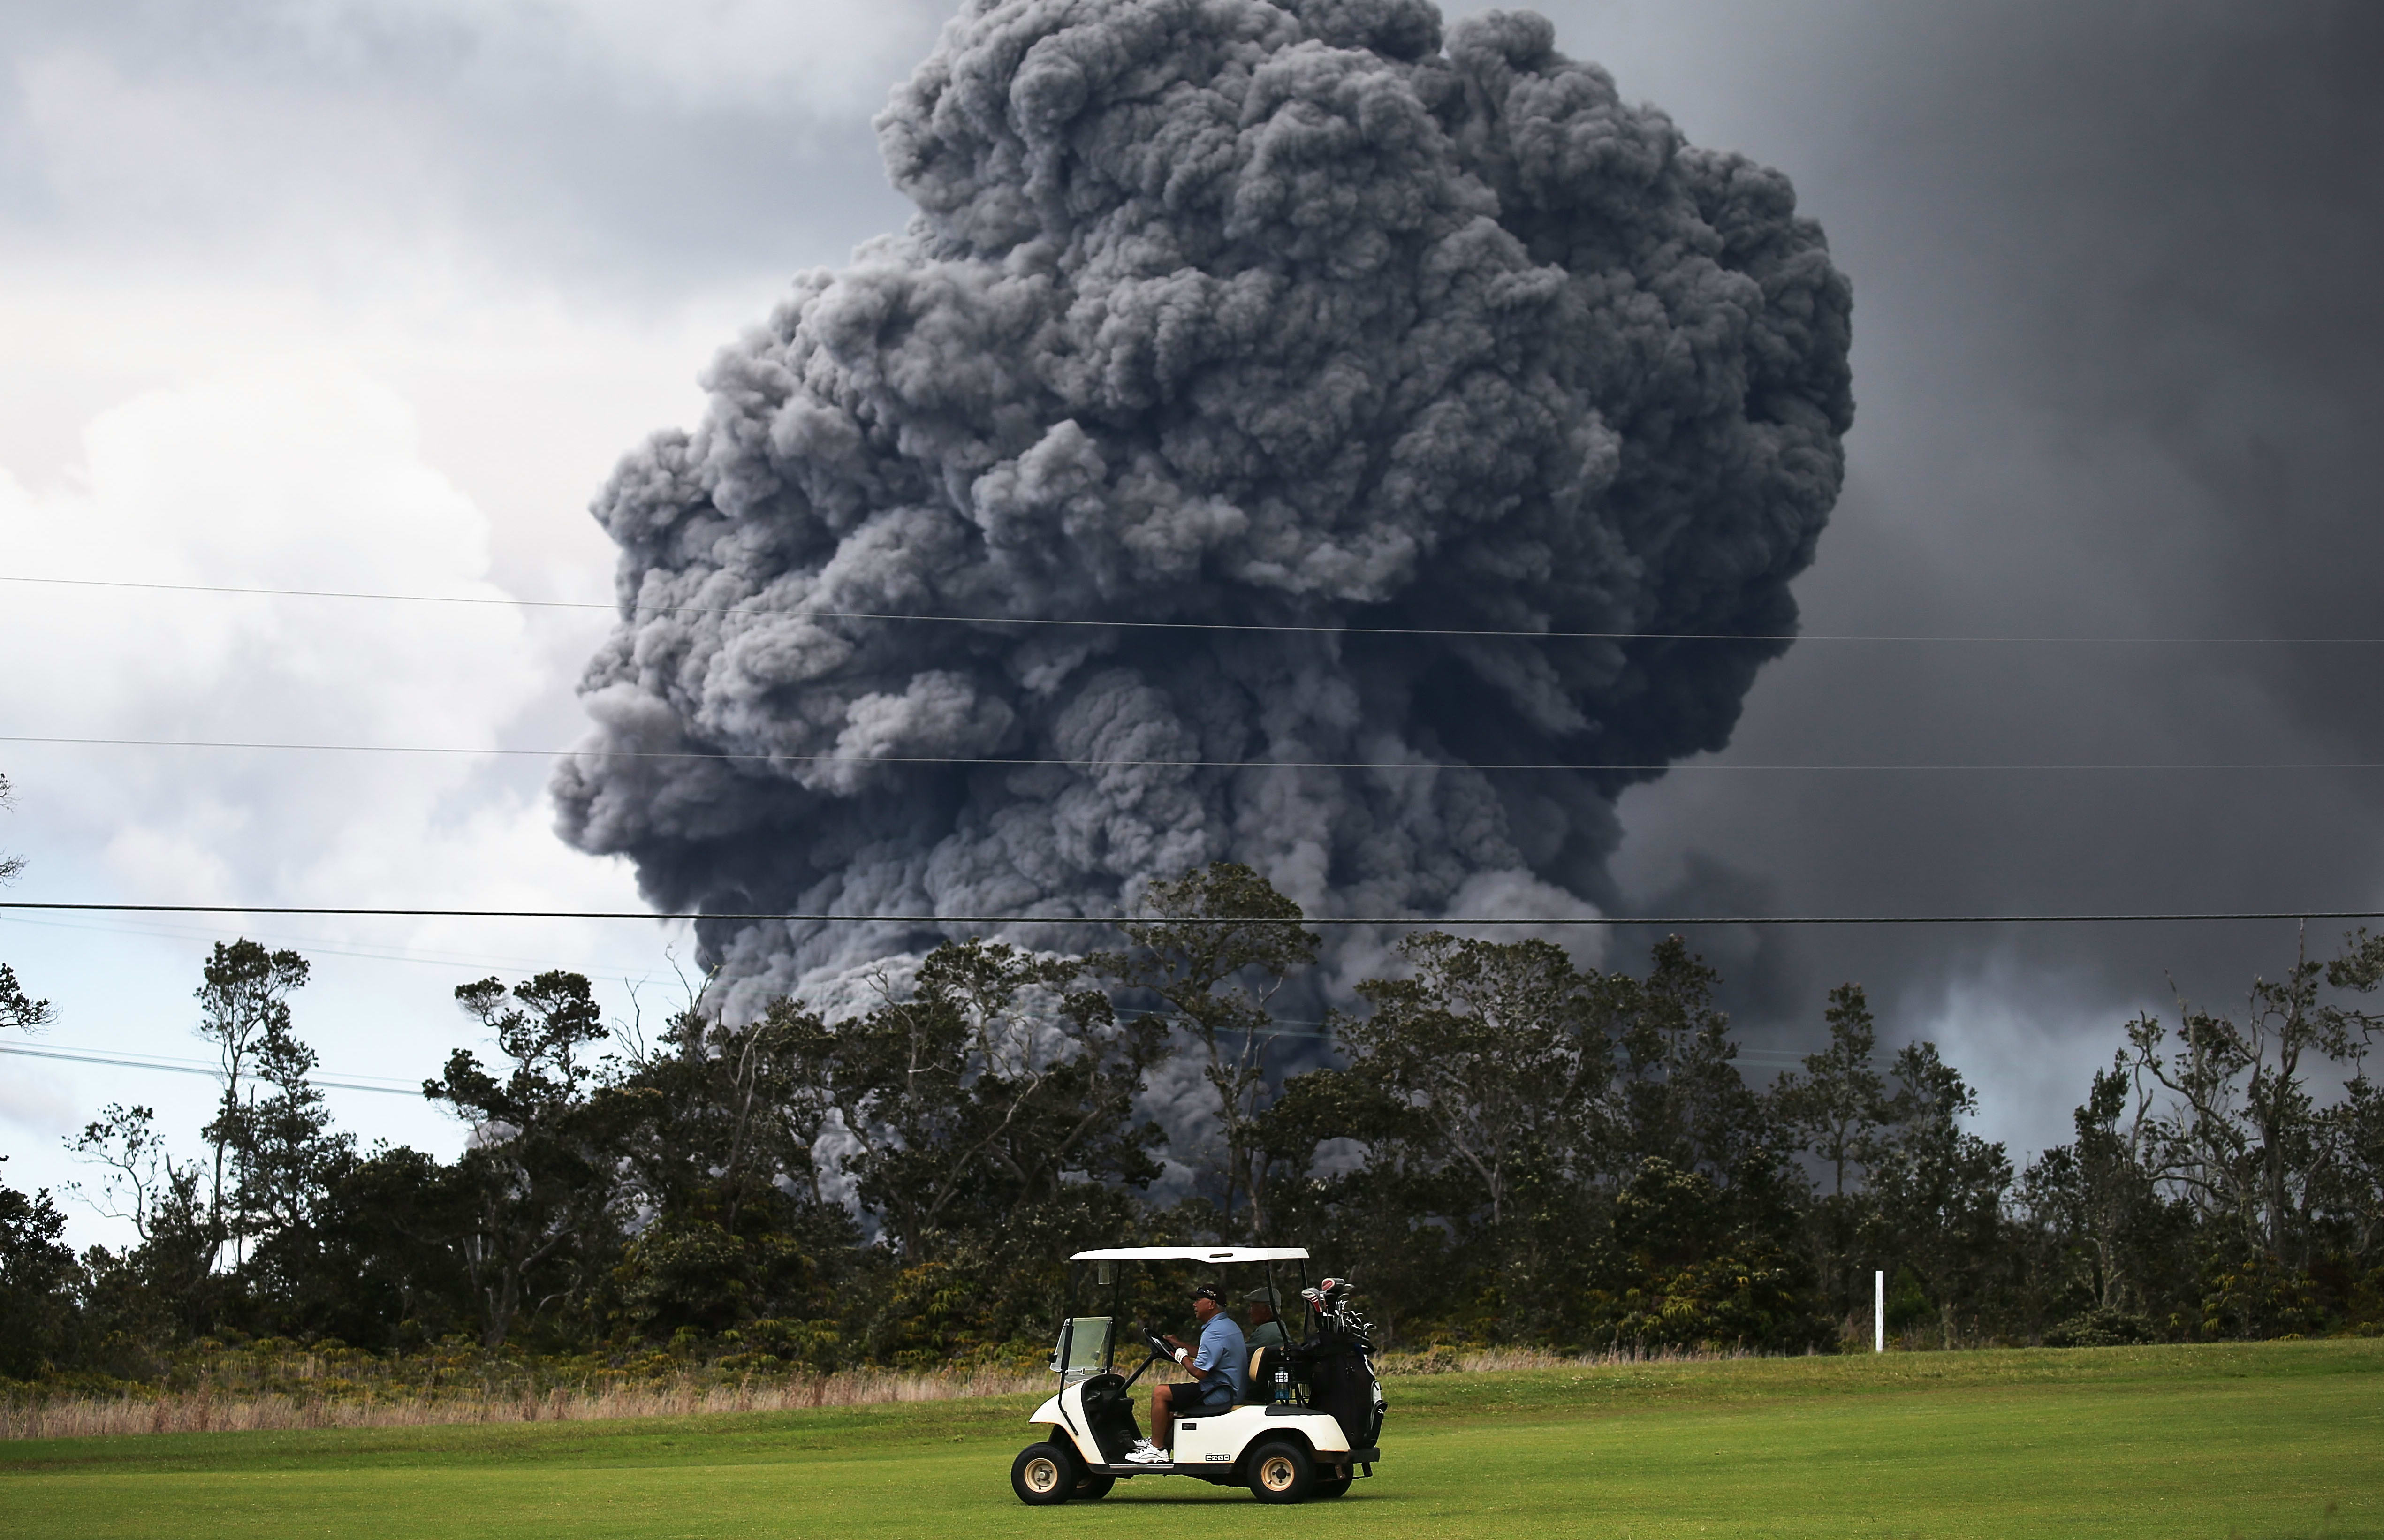 A man drives a golf cart at a golf course as an ash plume rises in the distance from the Kilauea volcano on Hawaii's Big Island on May 15, 2018